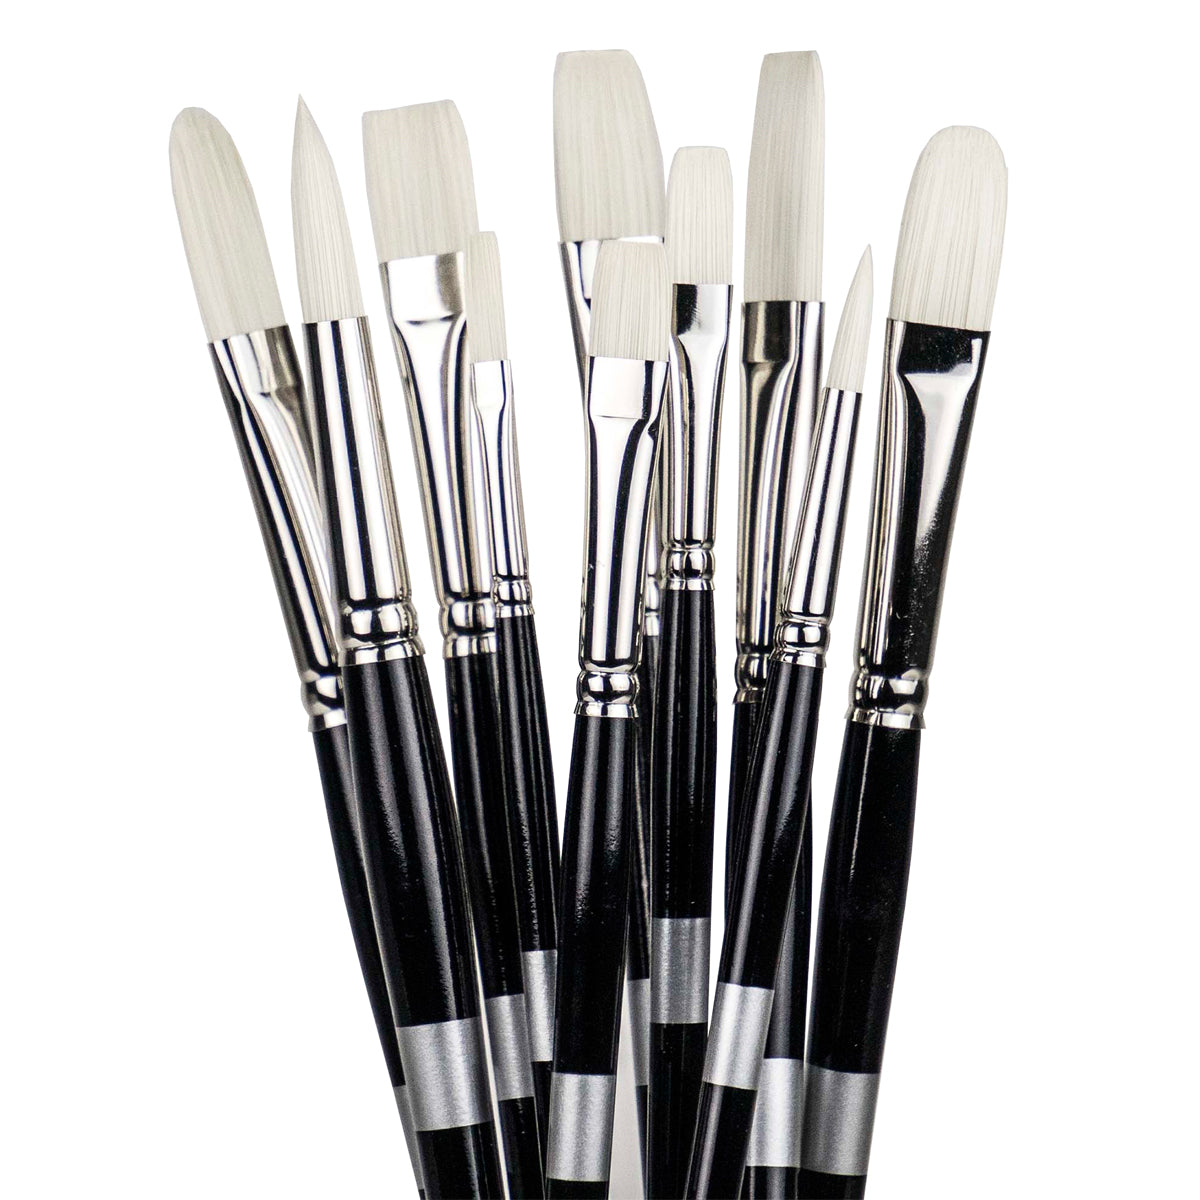 Trekell Opal Synthetic Hog Bristle Brush - For Oil & Acrylic Paints